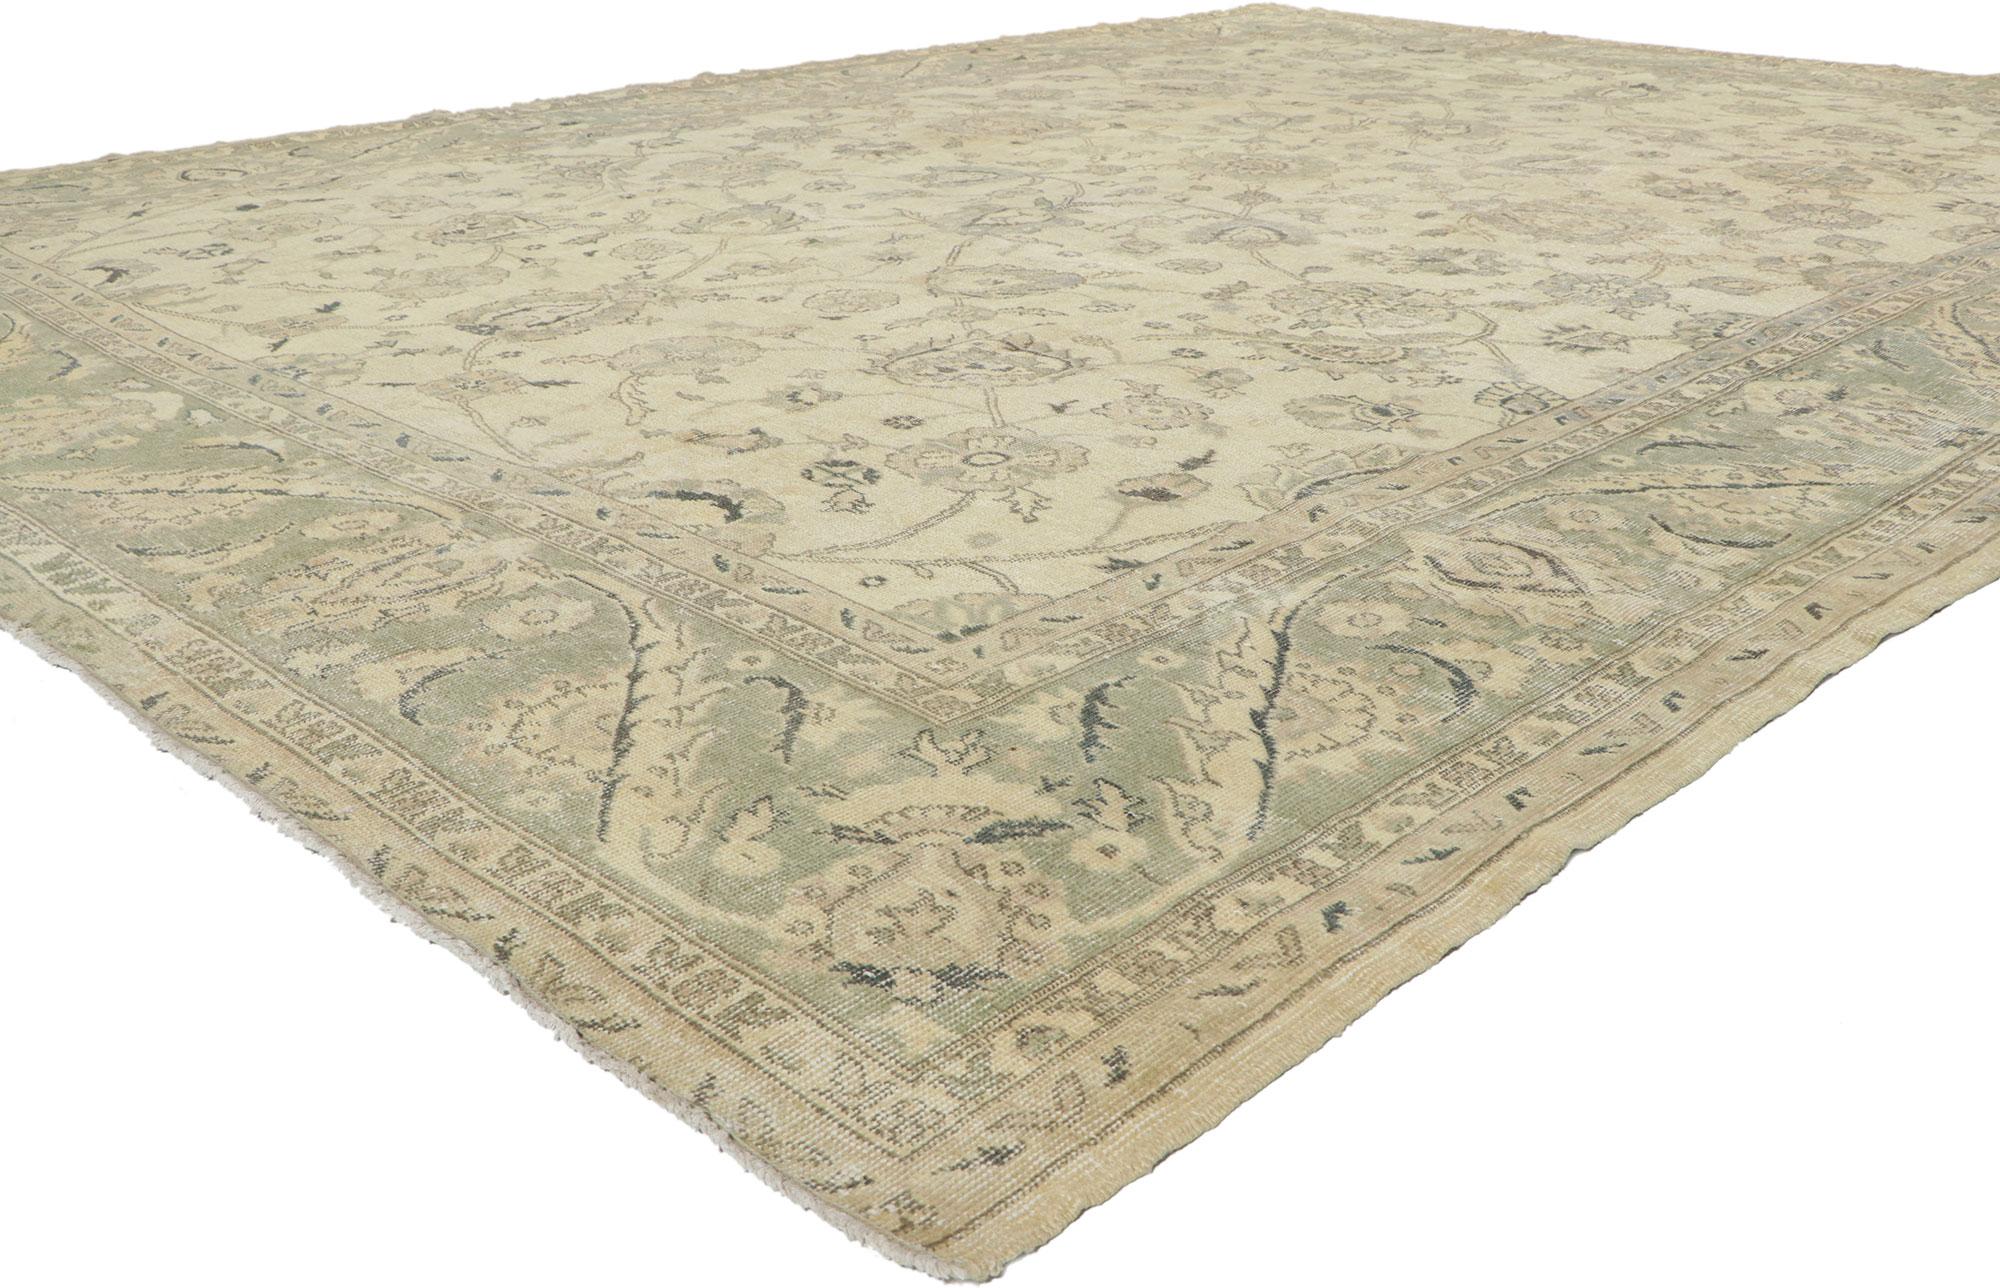 51232 Distressed Vintage Turkish Sivas Rug, 09'11 x 13'02. 
Prepare to be whisked away on an enchanting journey of natural elegance, as you step onto this lovingly time-worn vintage Turkish Sivas rug. Transport yourself into a world of relaxed